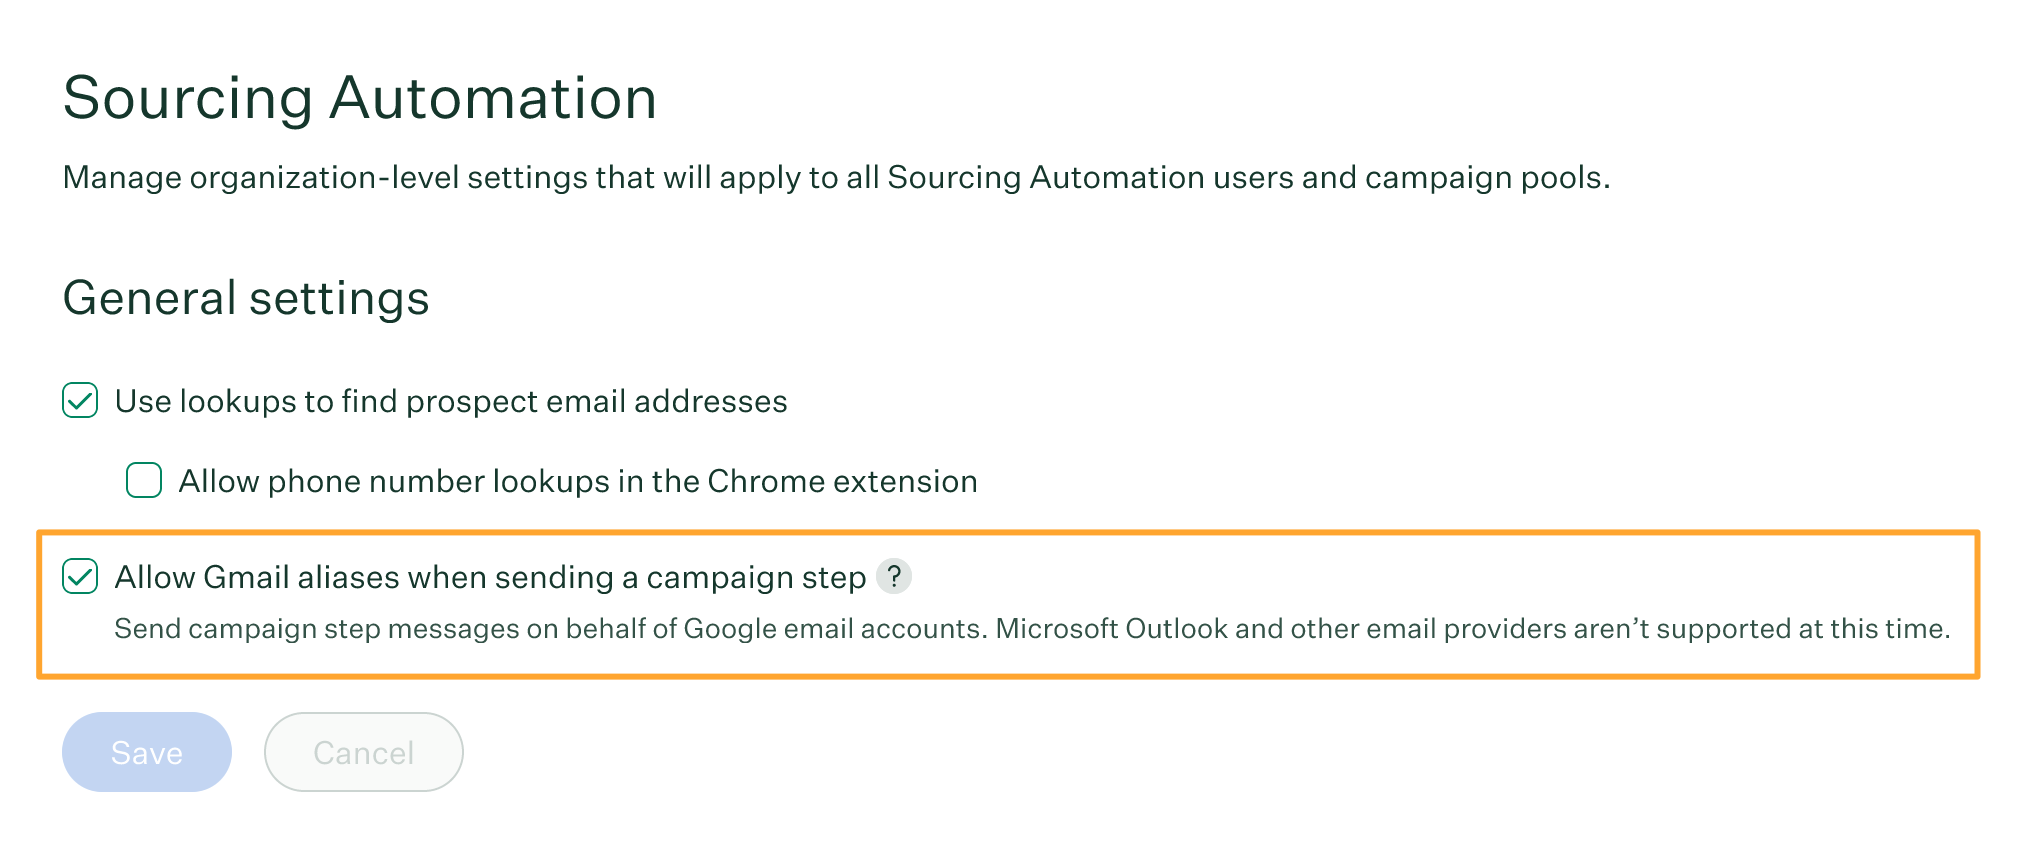 Sourcing Automation general settings in Configure with Gmail aliases permission turned on